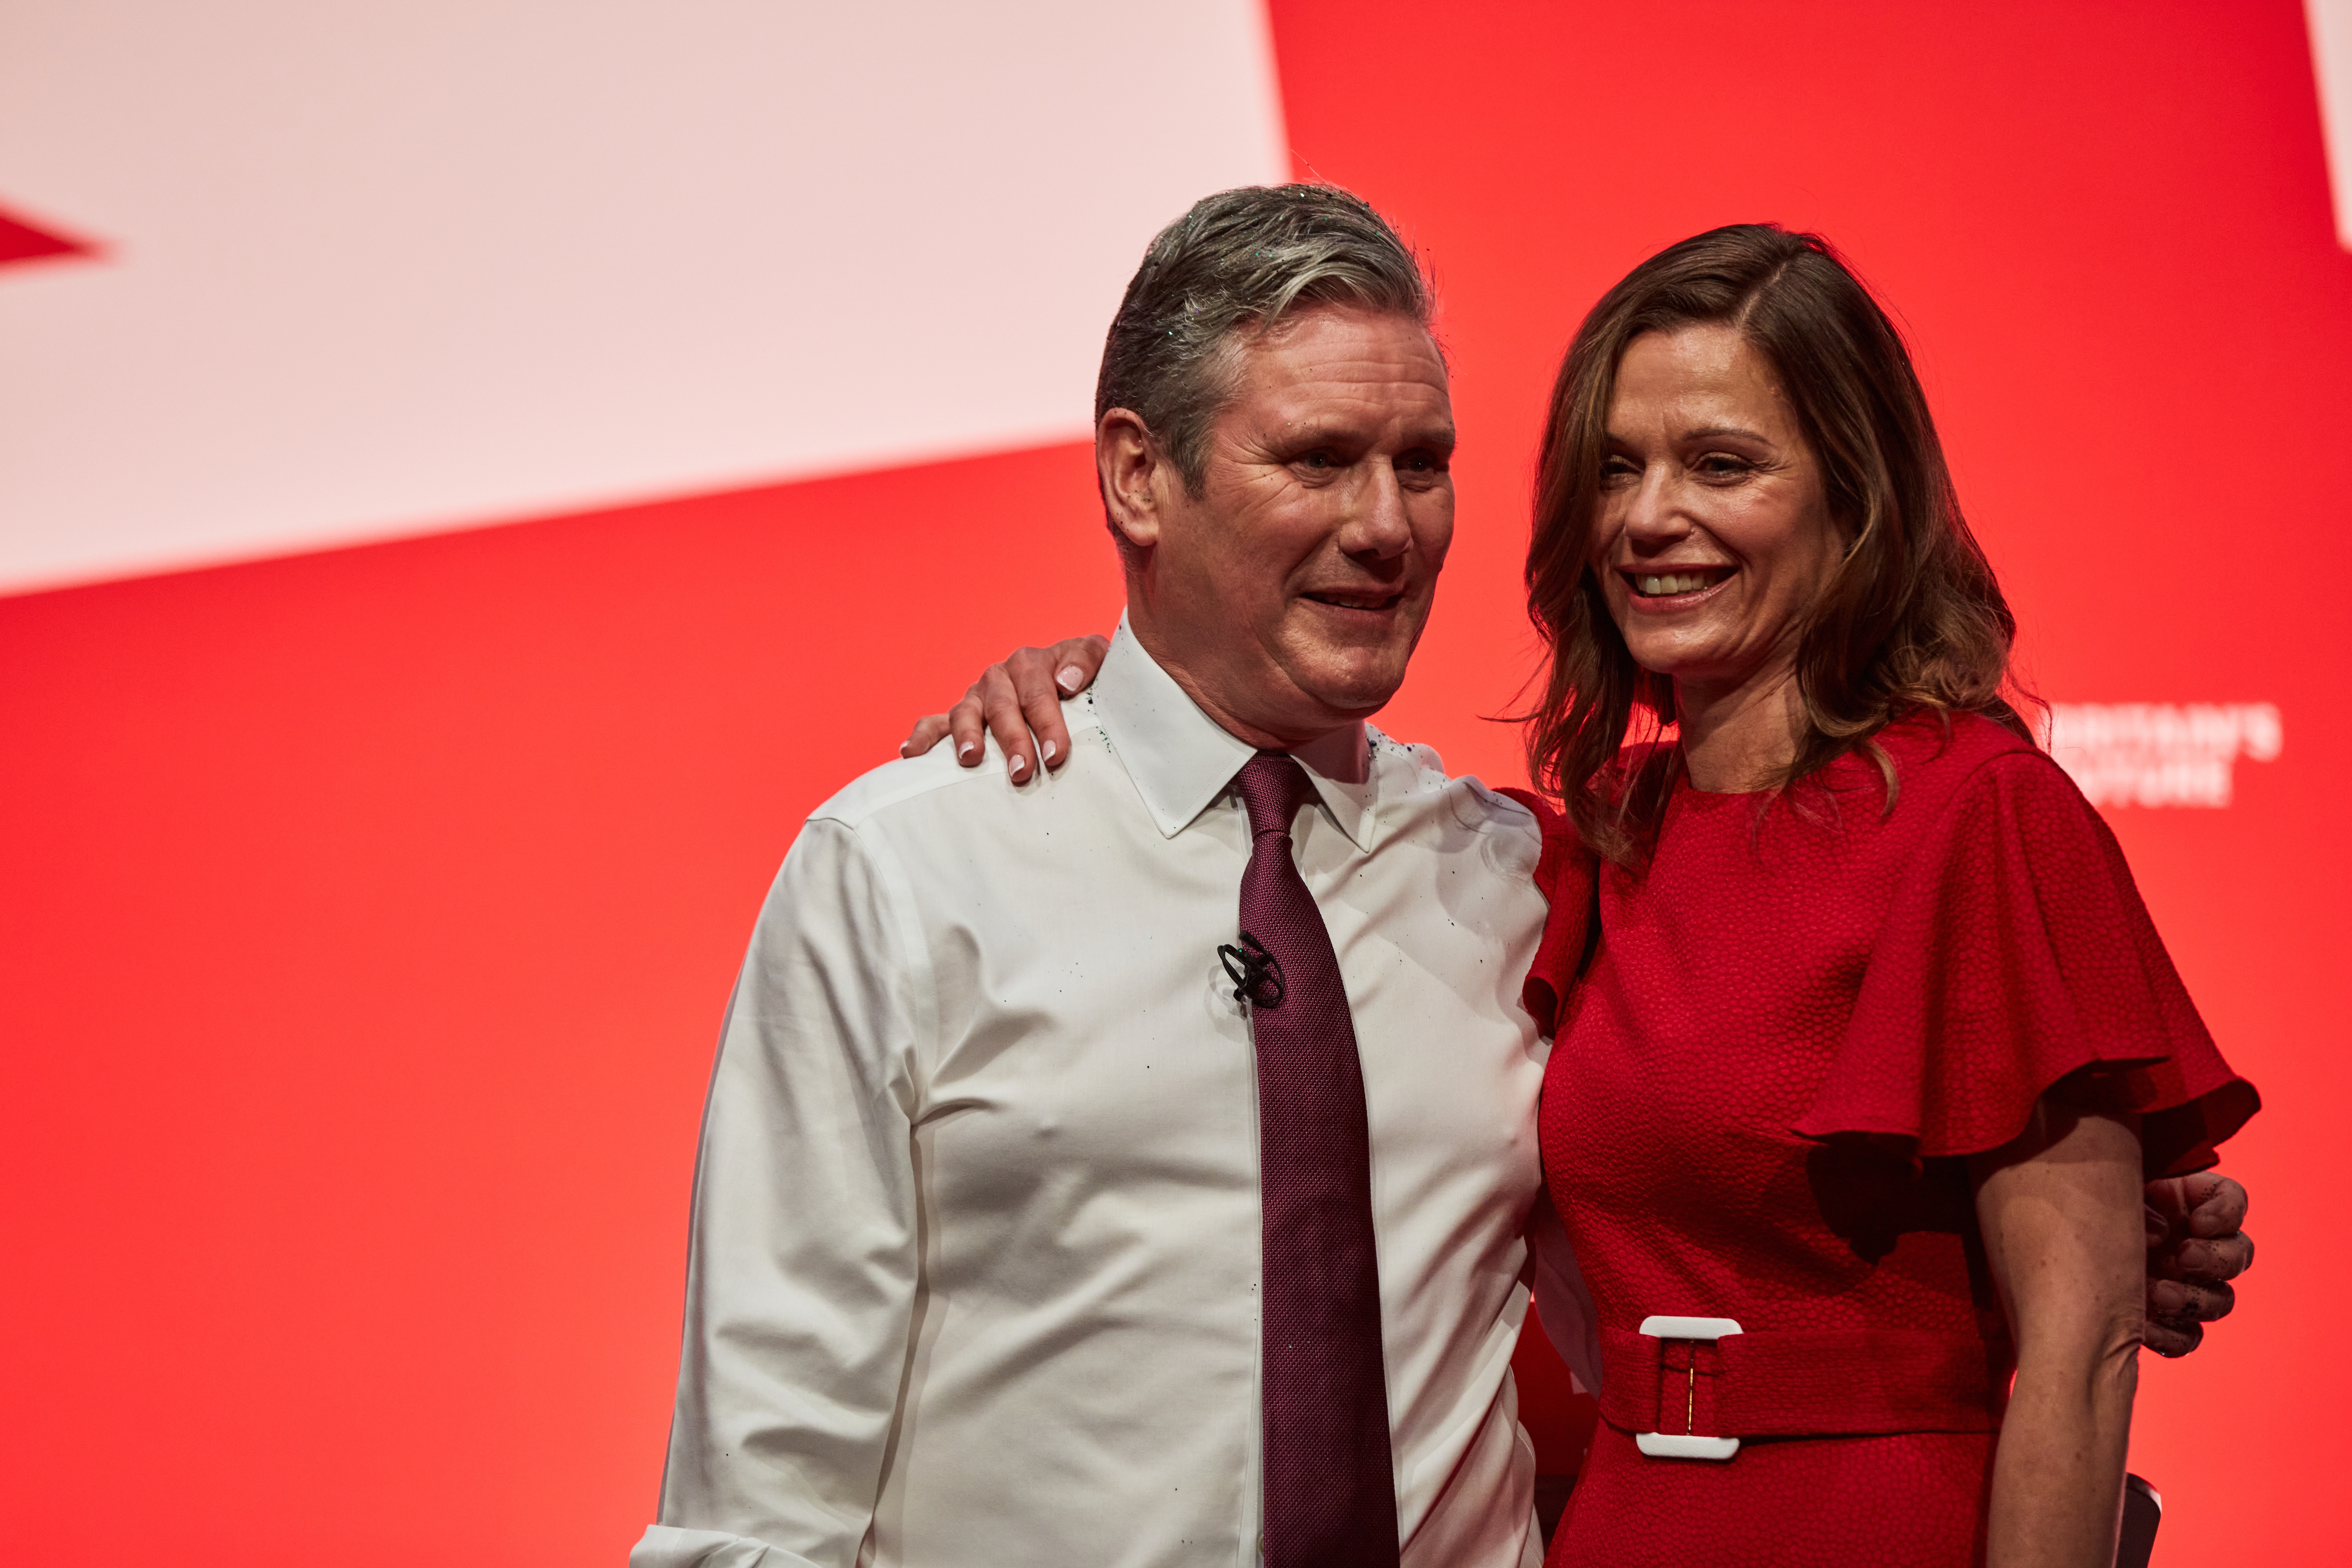 Keir Starmer will not be a 'part time' PM